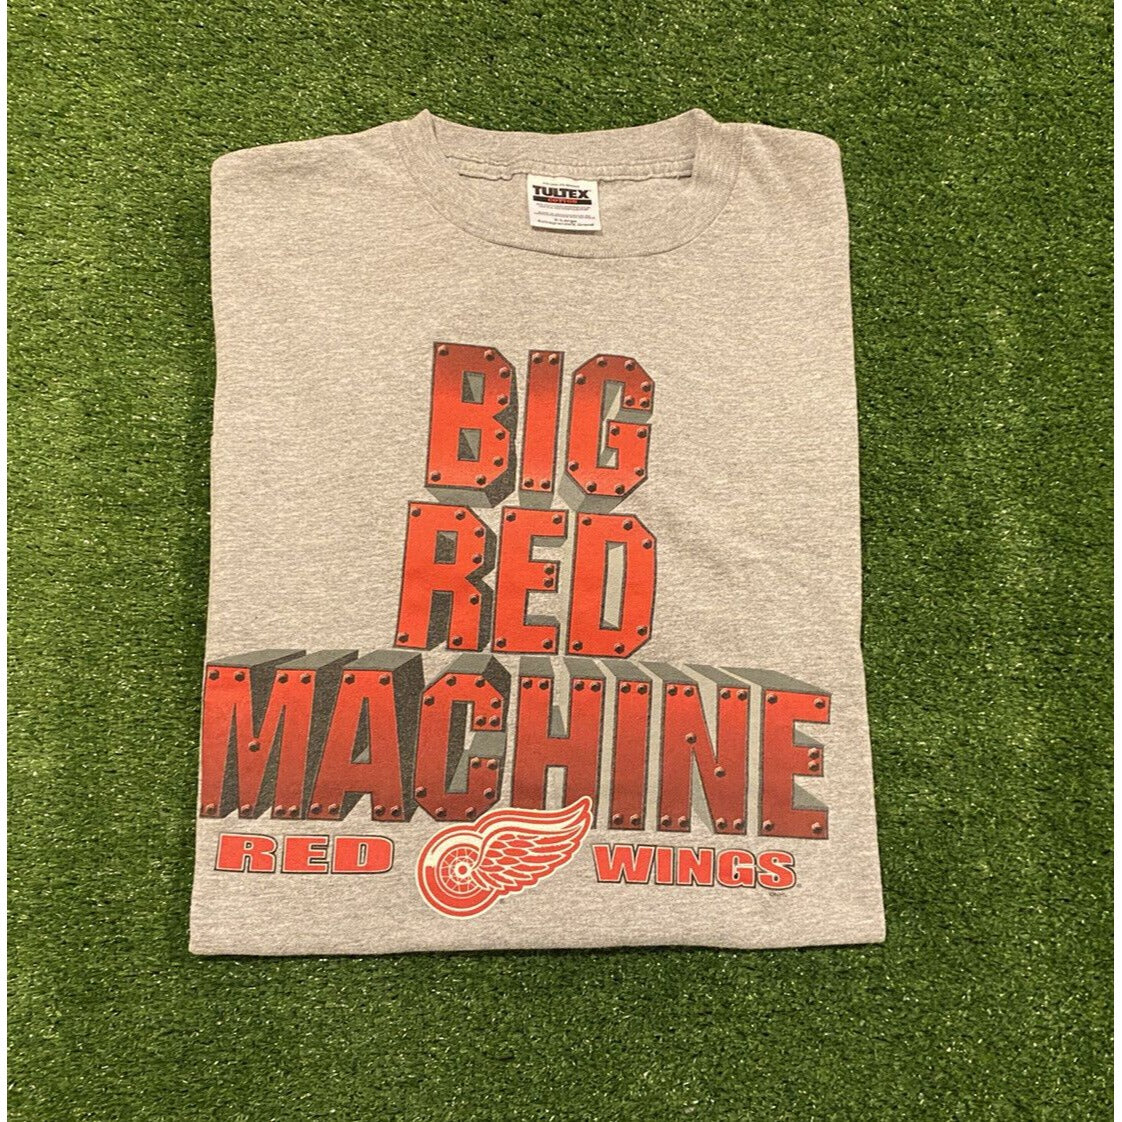 Vintage Tultex Detroit Red Wings big Red machine t-shirt XL gray